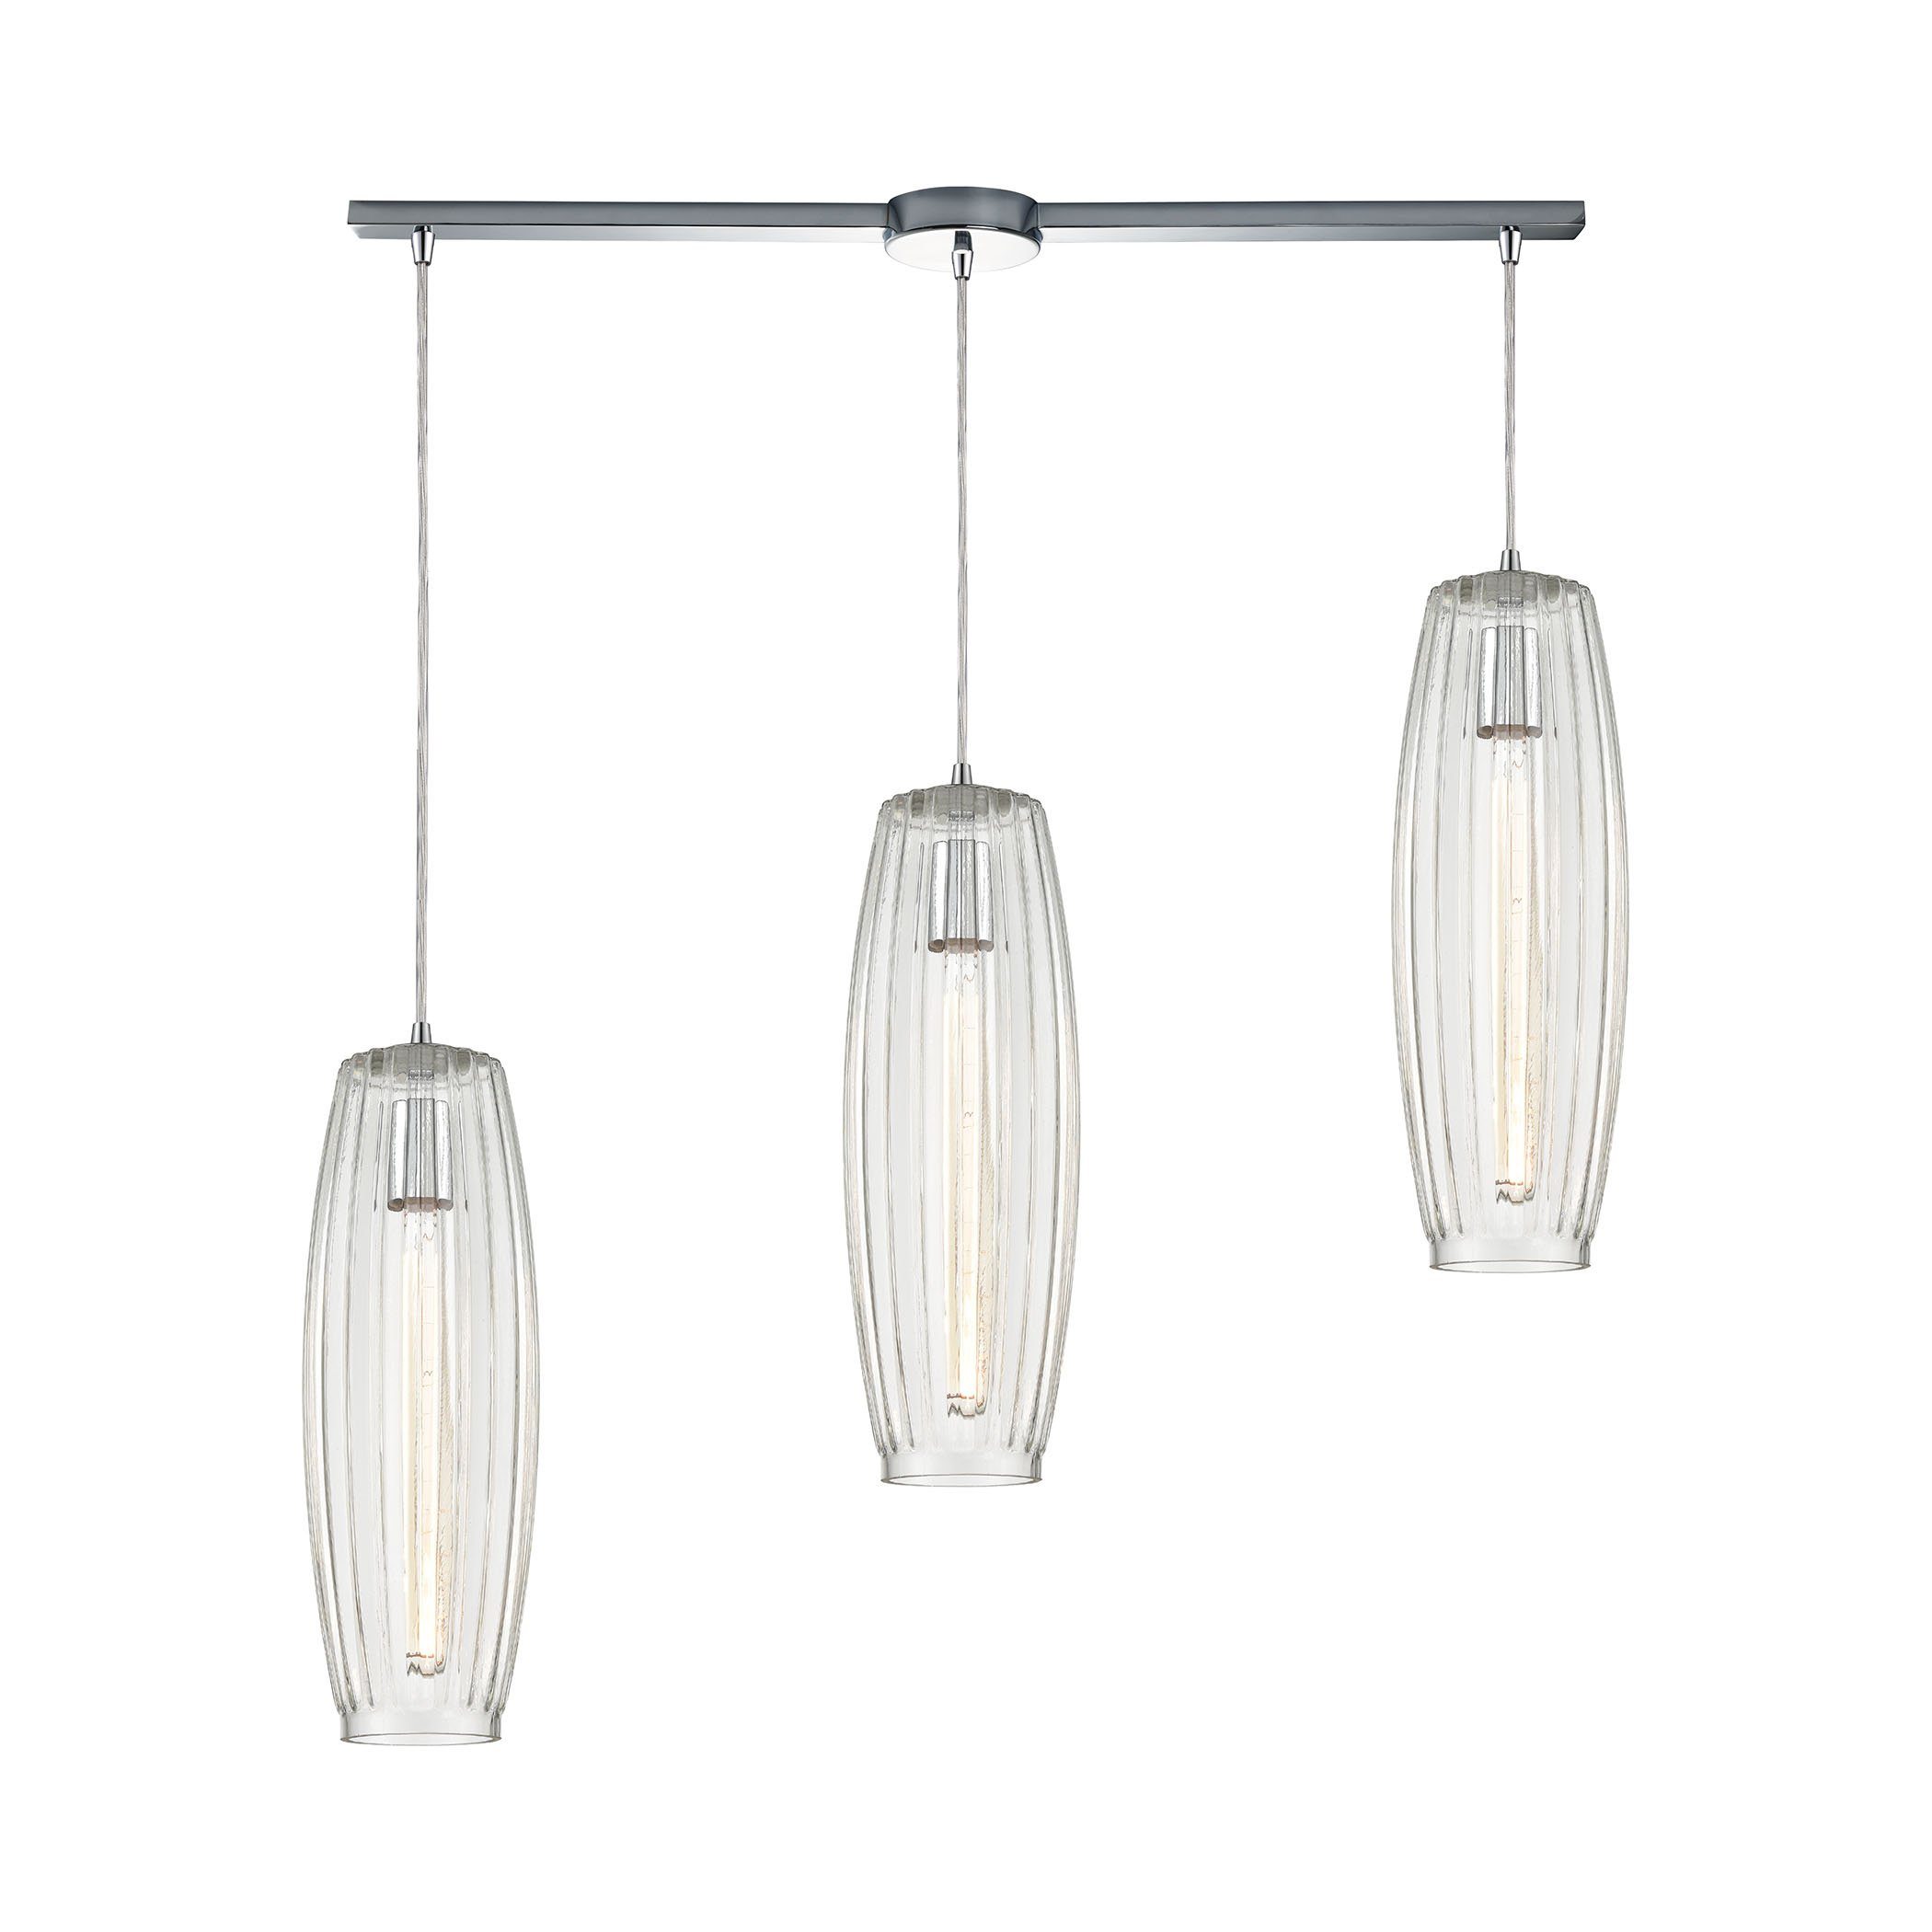 Satin Veil 3-Light Pendant in Polished Chrome with Clear Ribbed Glass Ceiling Elk Lighting 